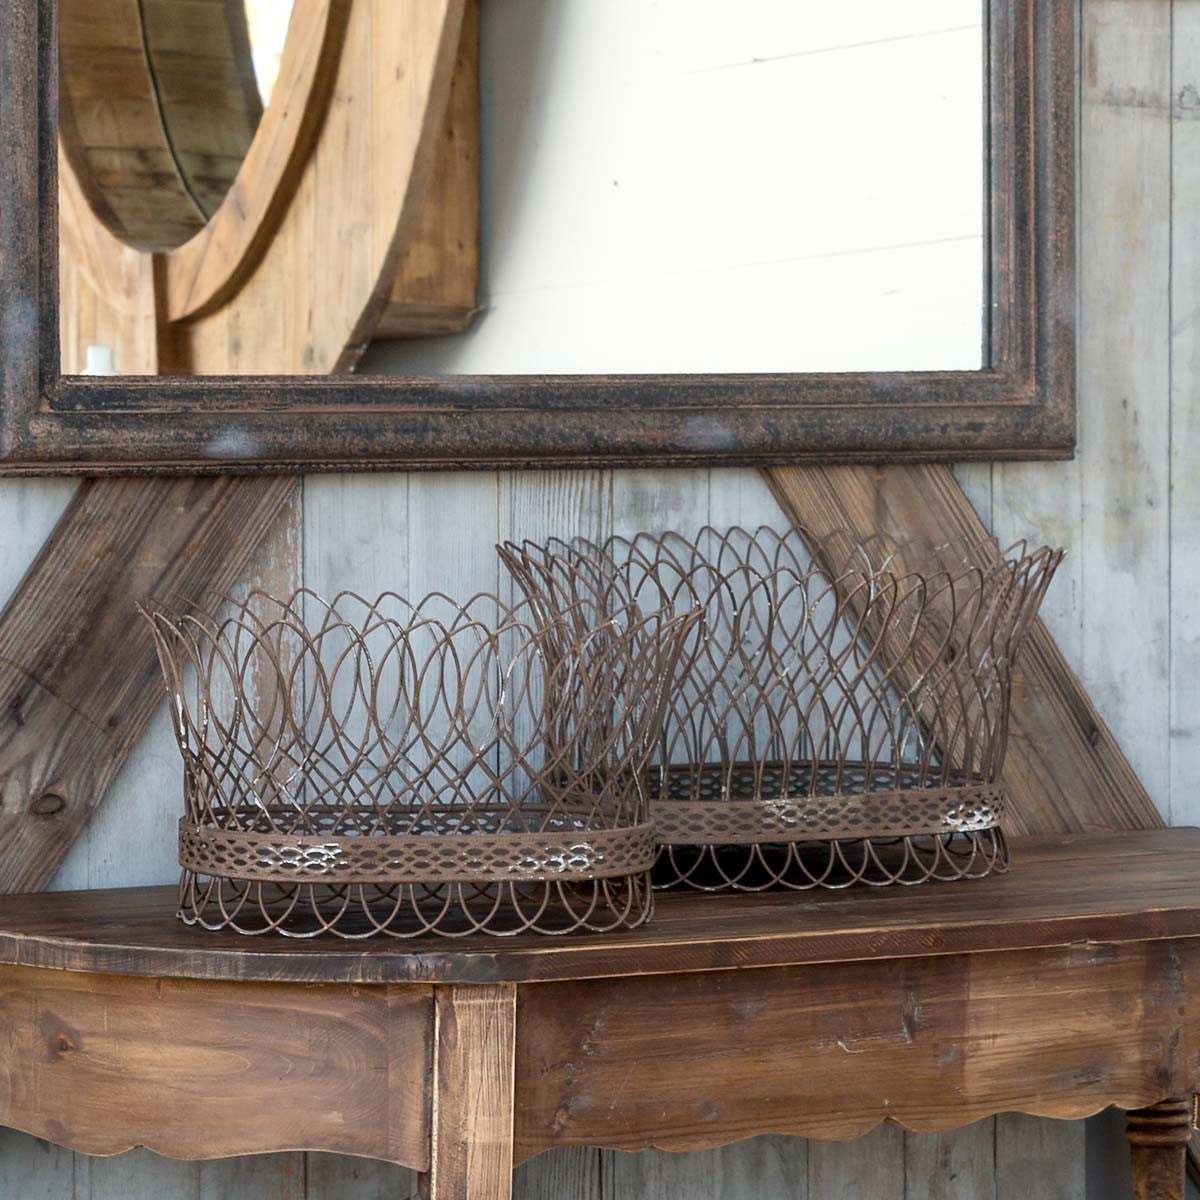 Nested French Wire Baskets